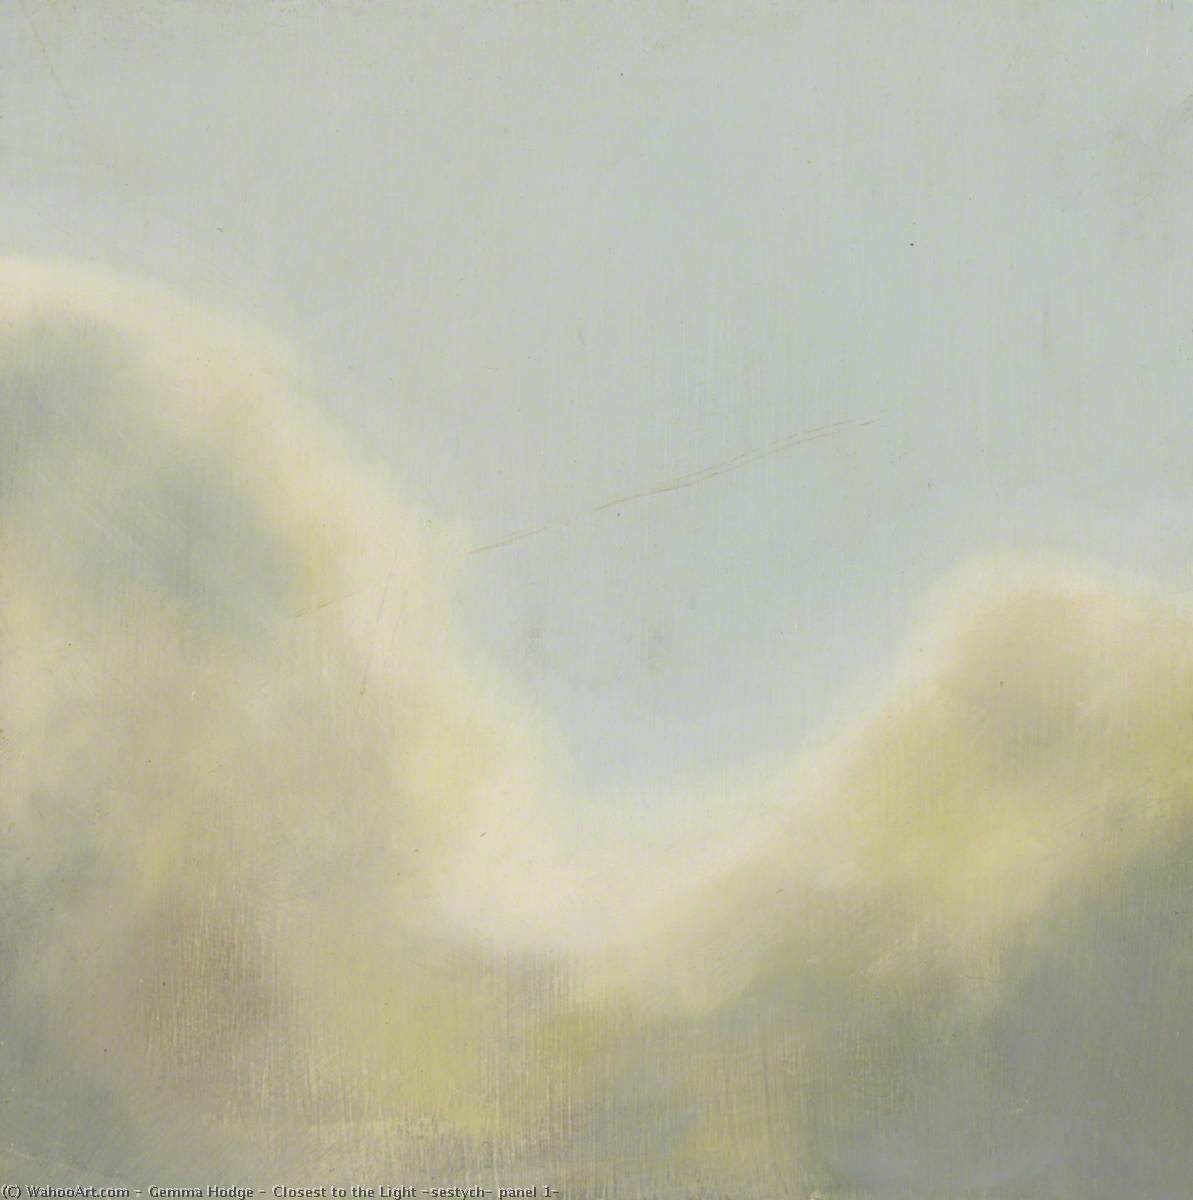 WikiOO.org - Encyclopedia of Fine Arts - Maalaus, taideteos Gemma Hodge - Closest to the Light (sestych, panel 1)